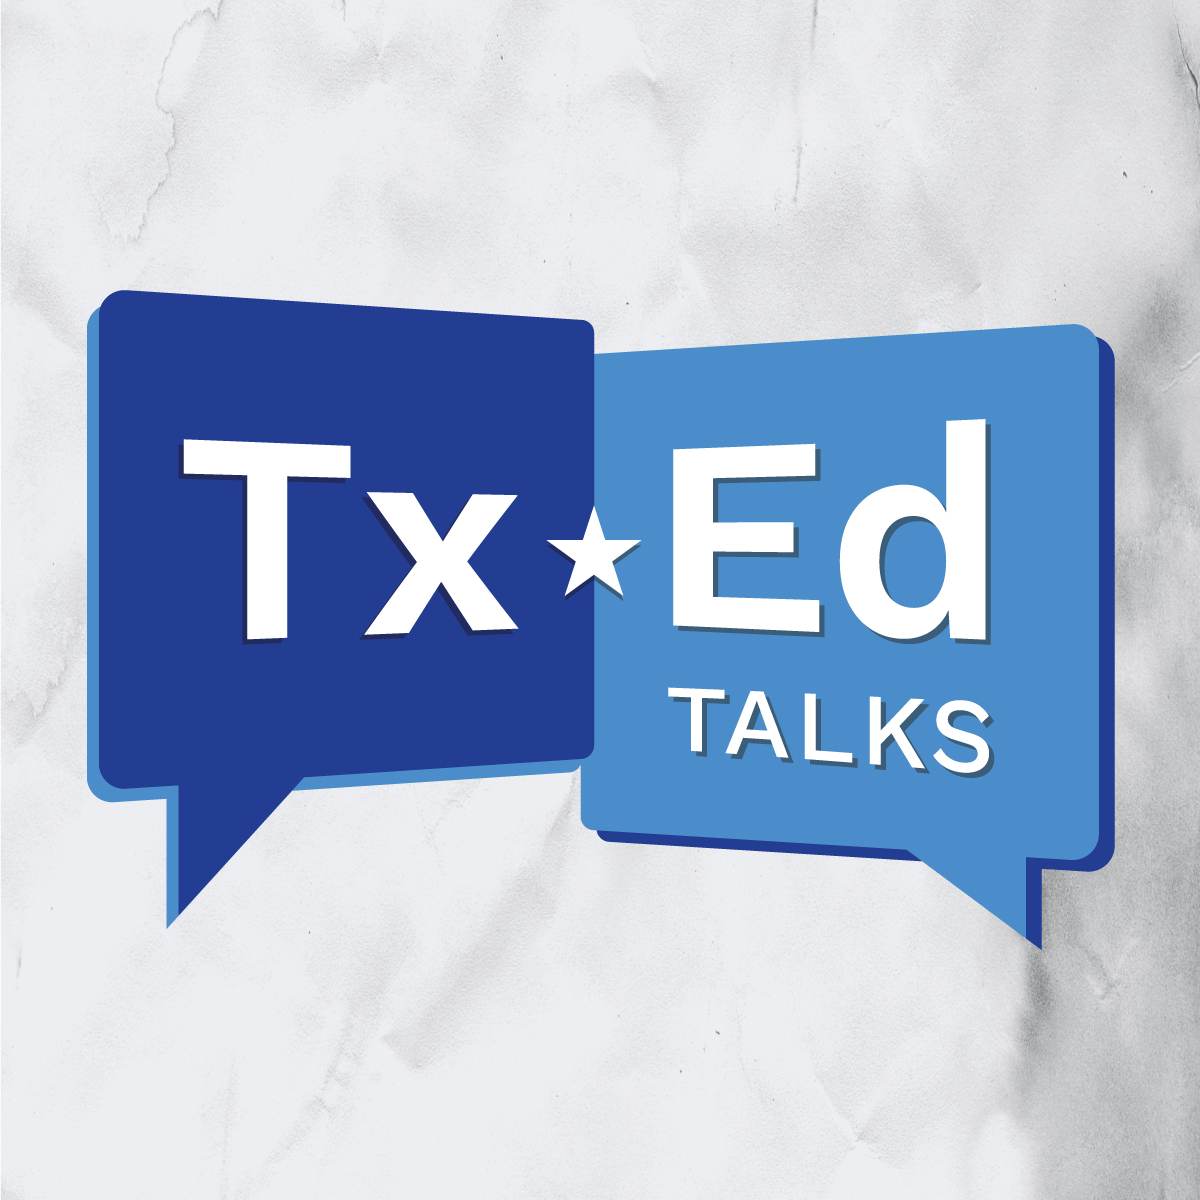 The Charles Butt Foundation is featuring the next TxEd Talks event.